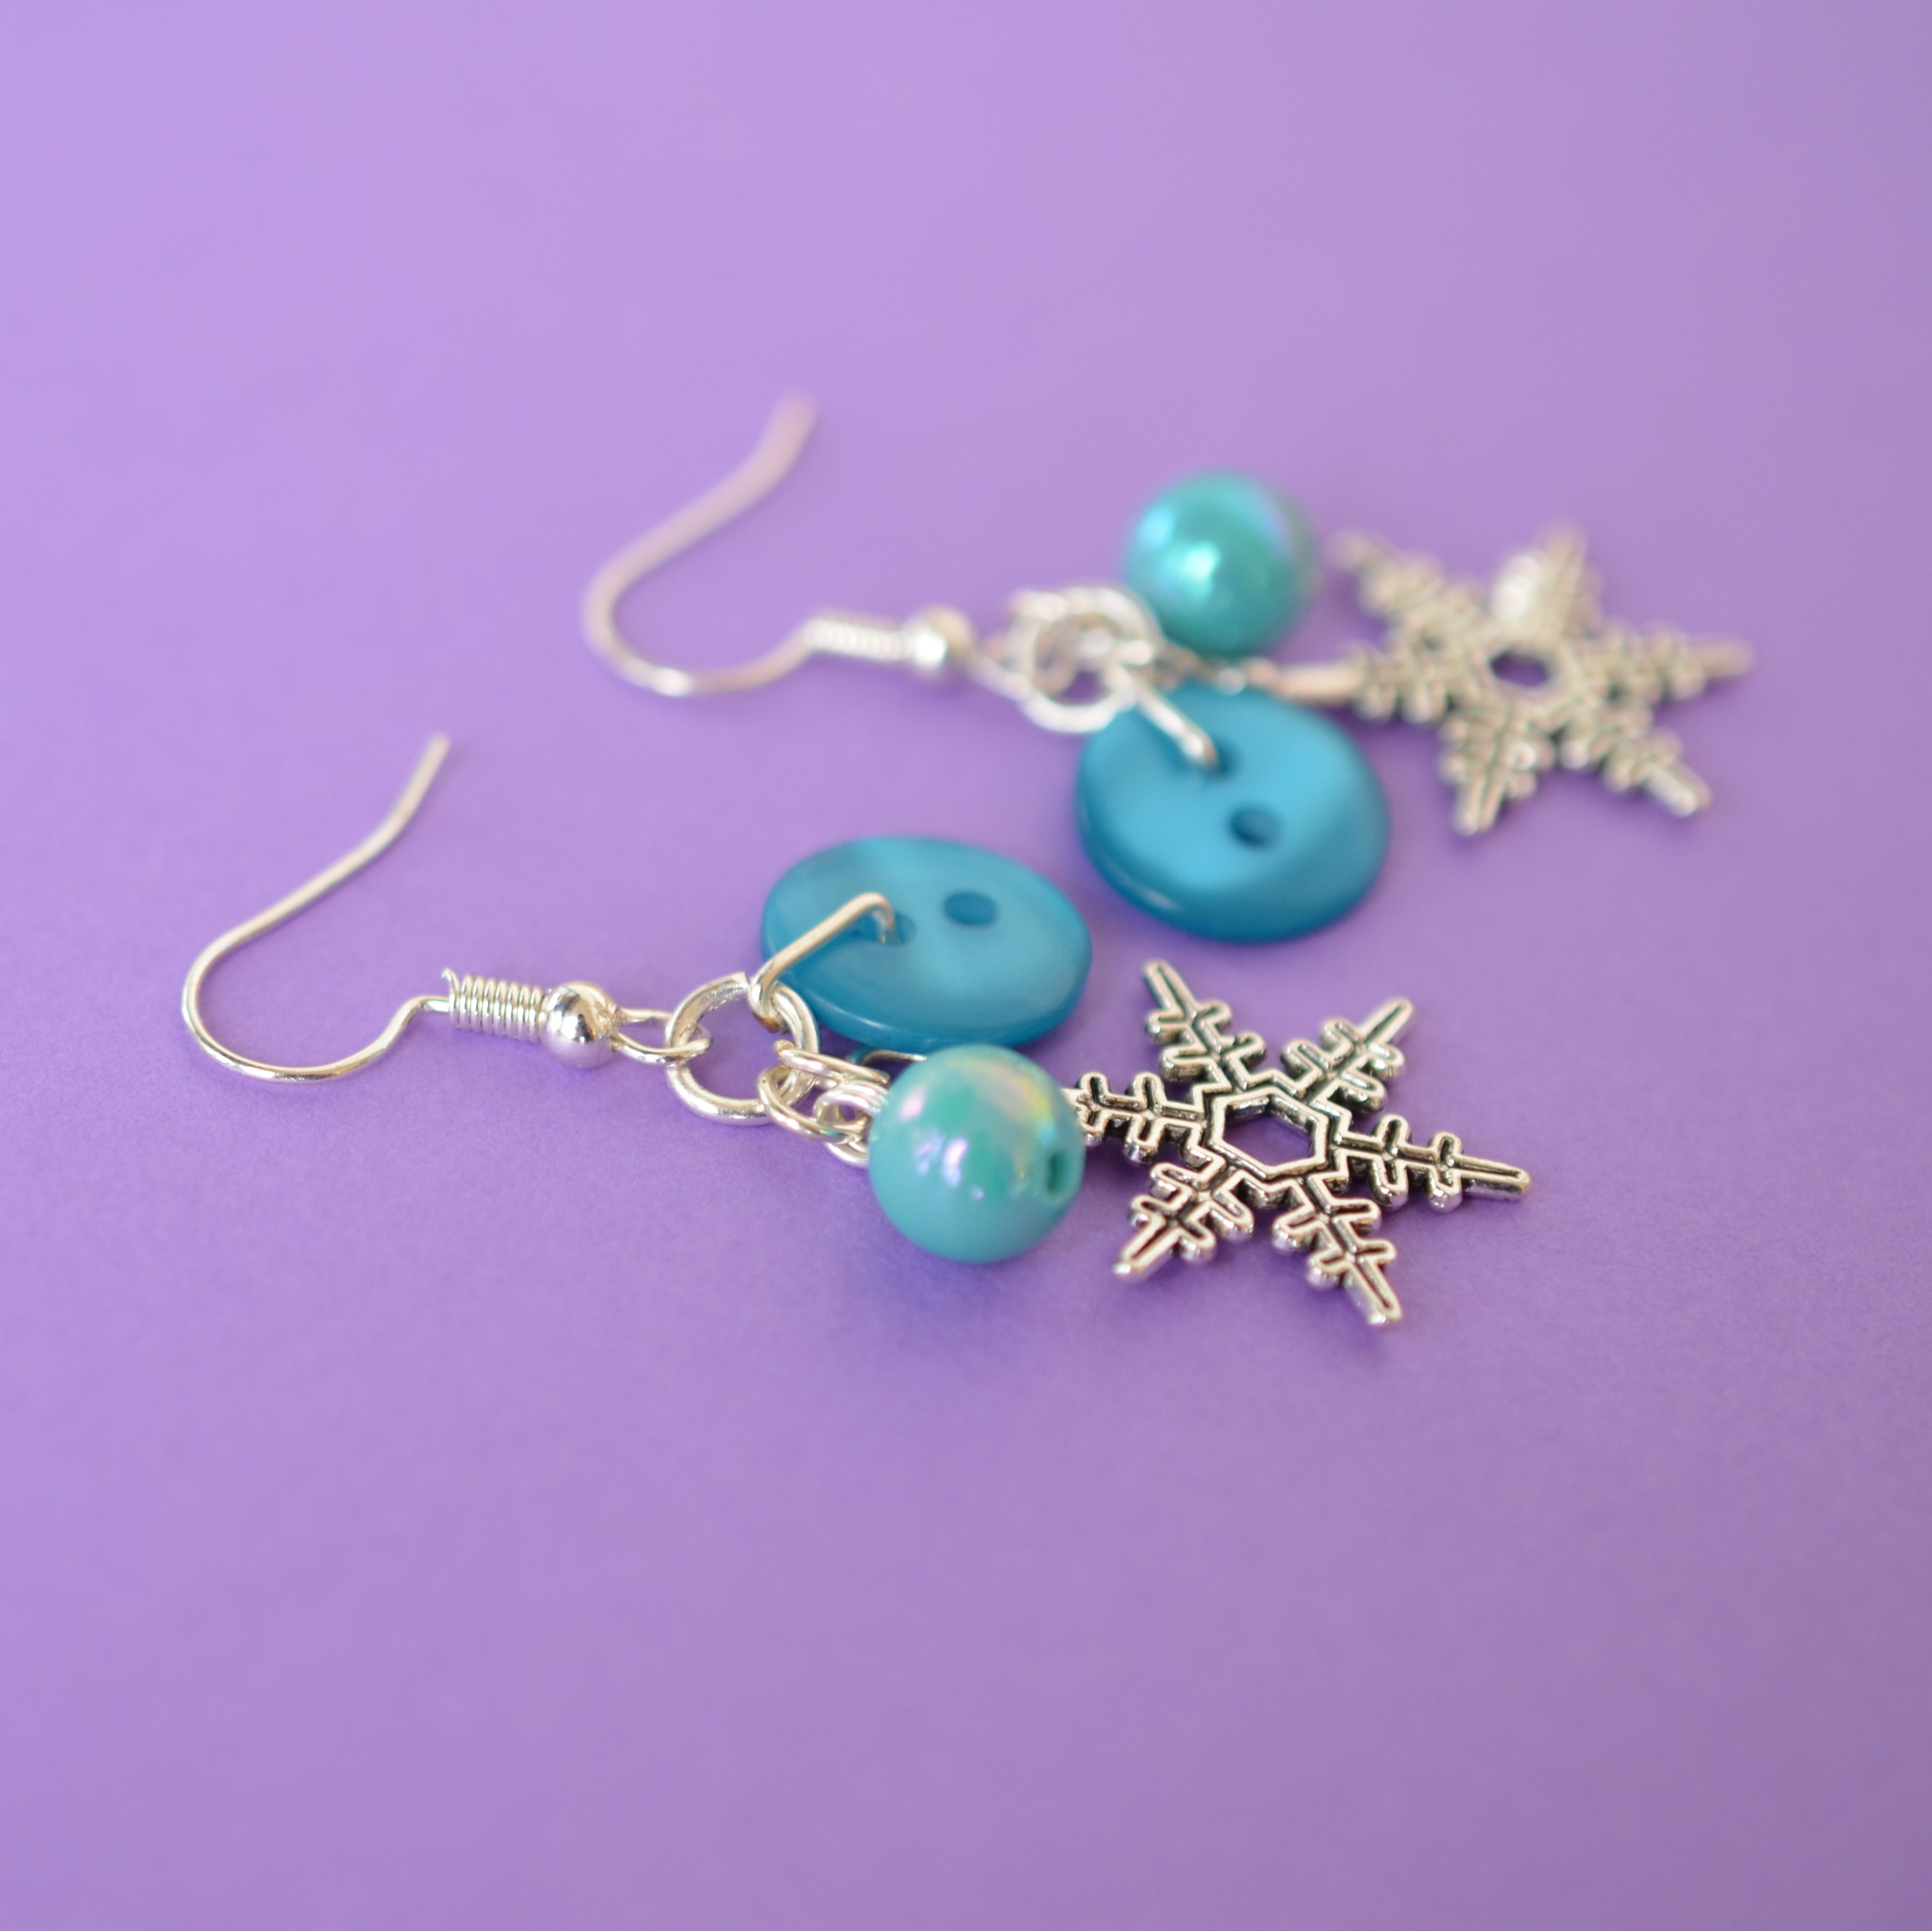 Turquoise Snowflake Cluster Charm Earrings